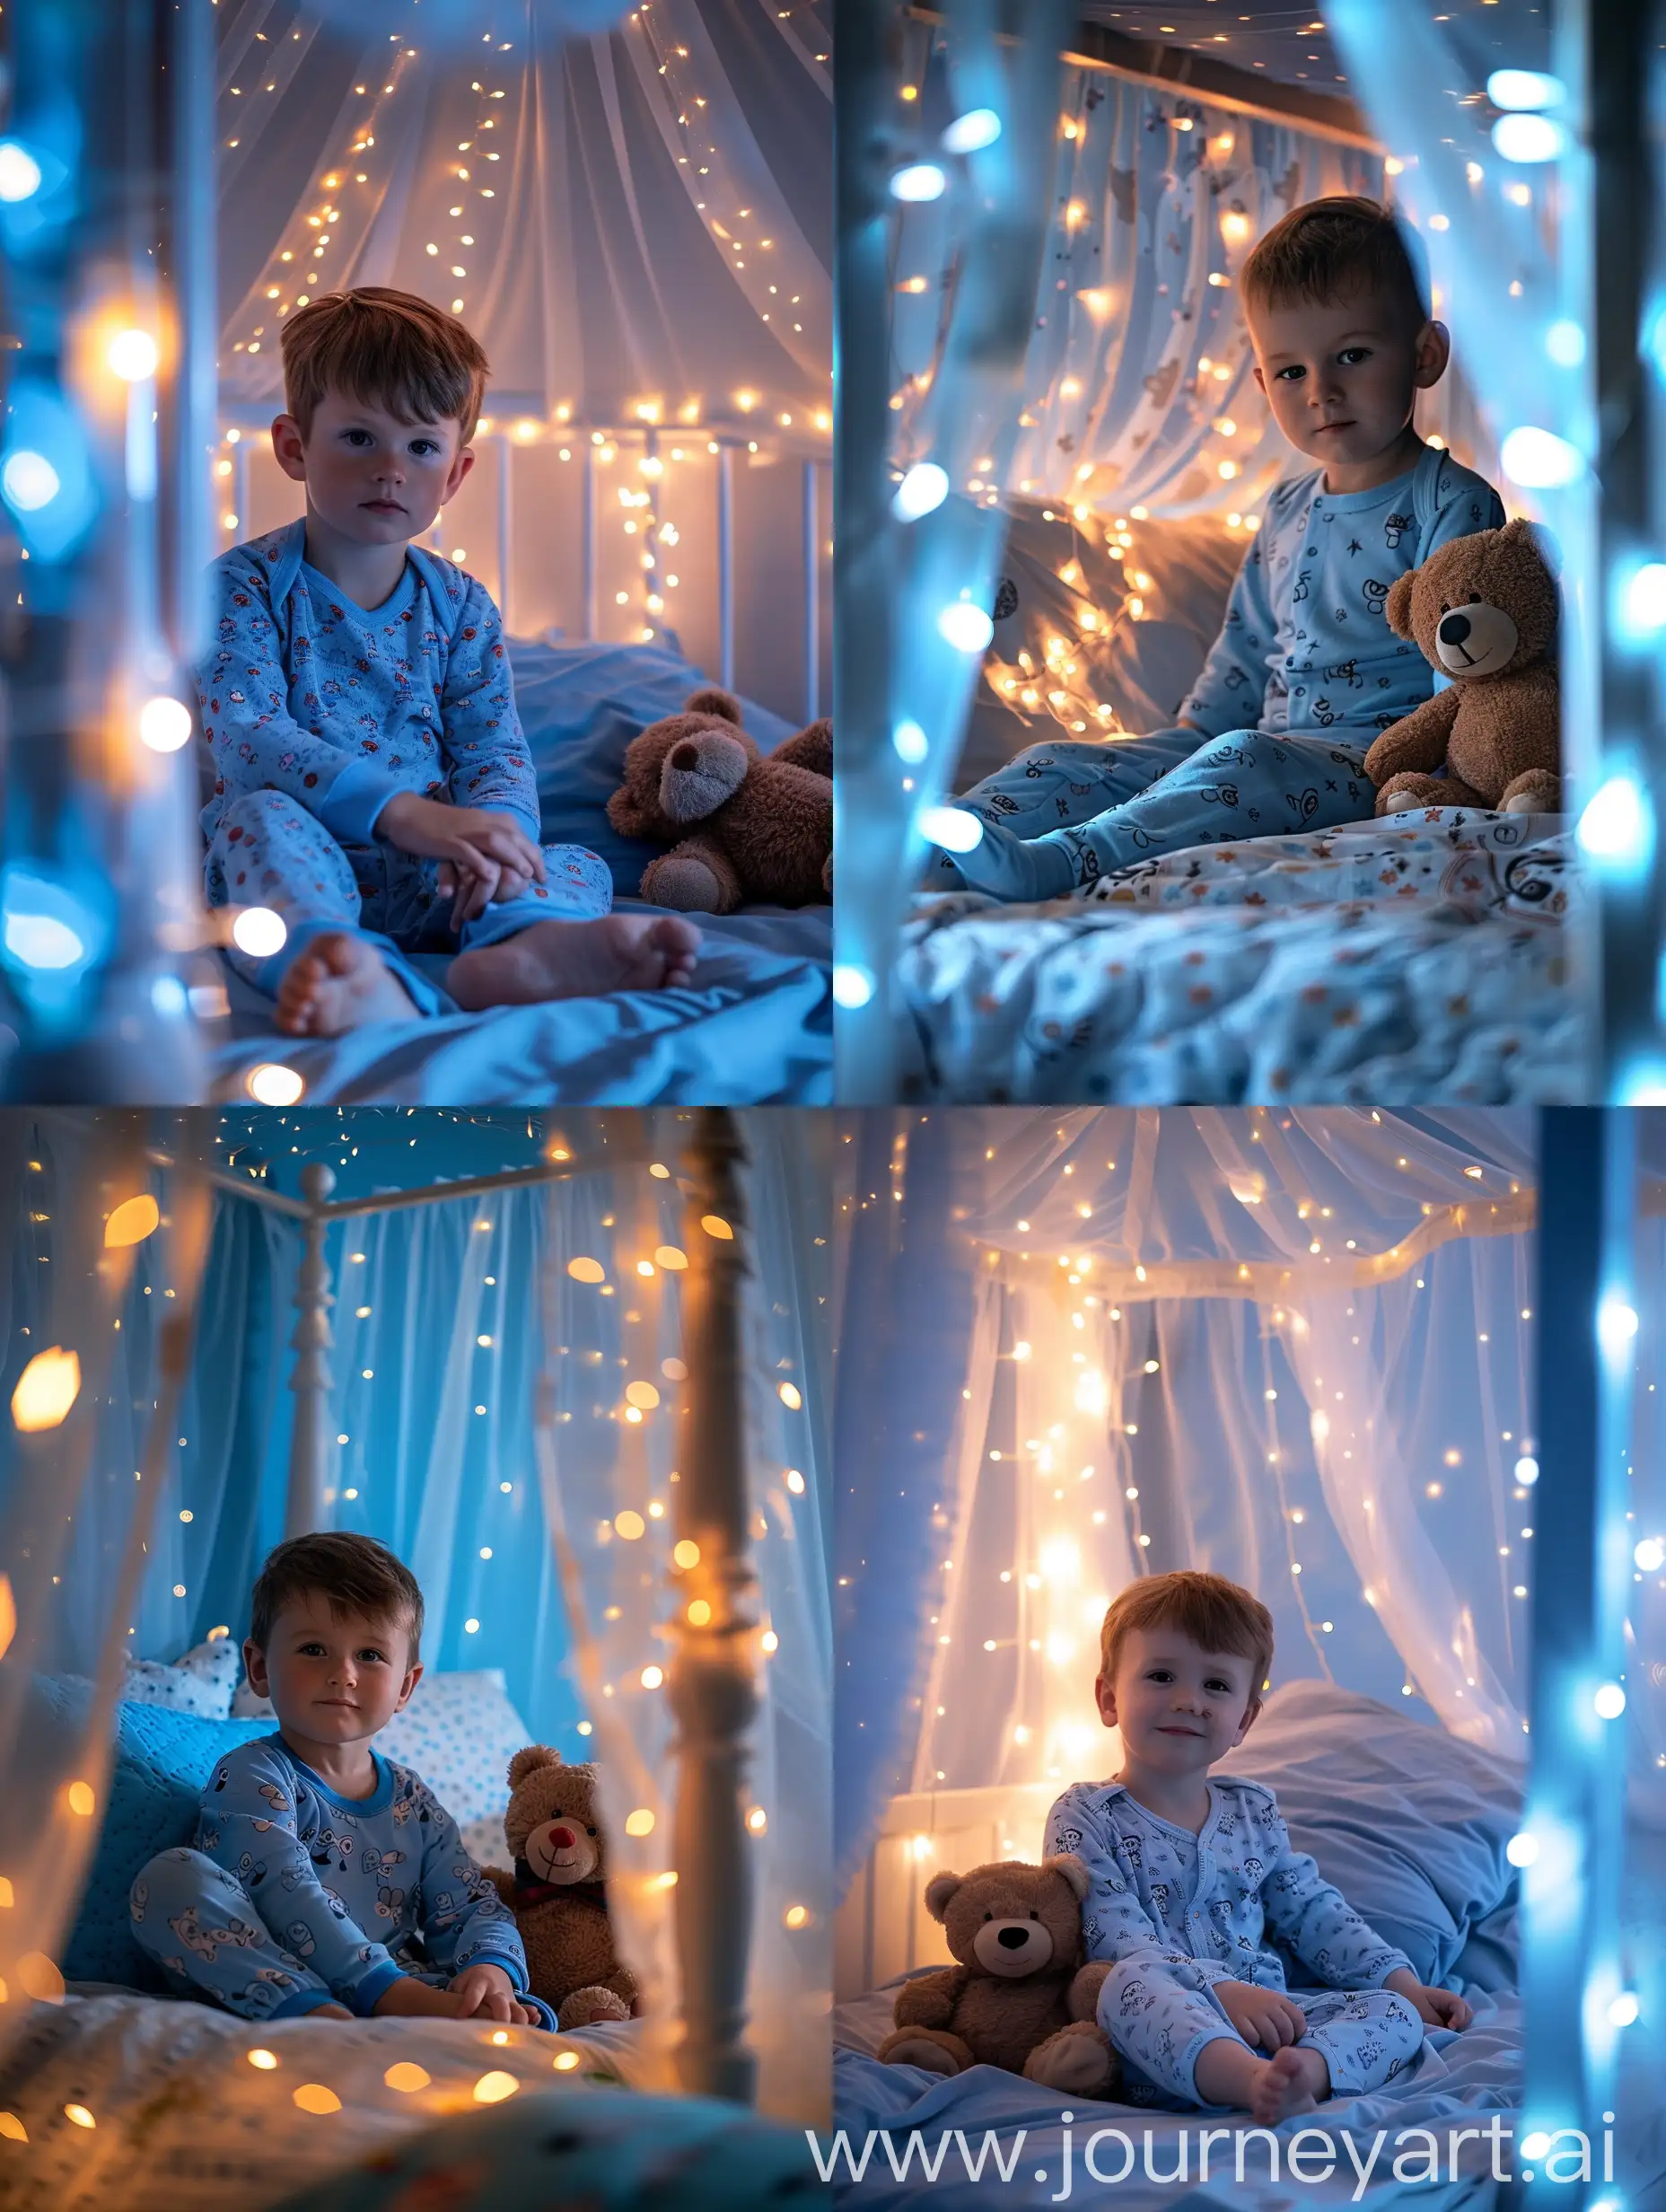 Child-in-Pajamas-Sitting-on-Glowing-Canopy-Bed-with-Teddy-Bear